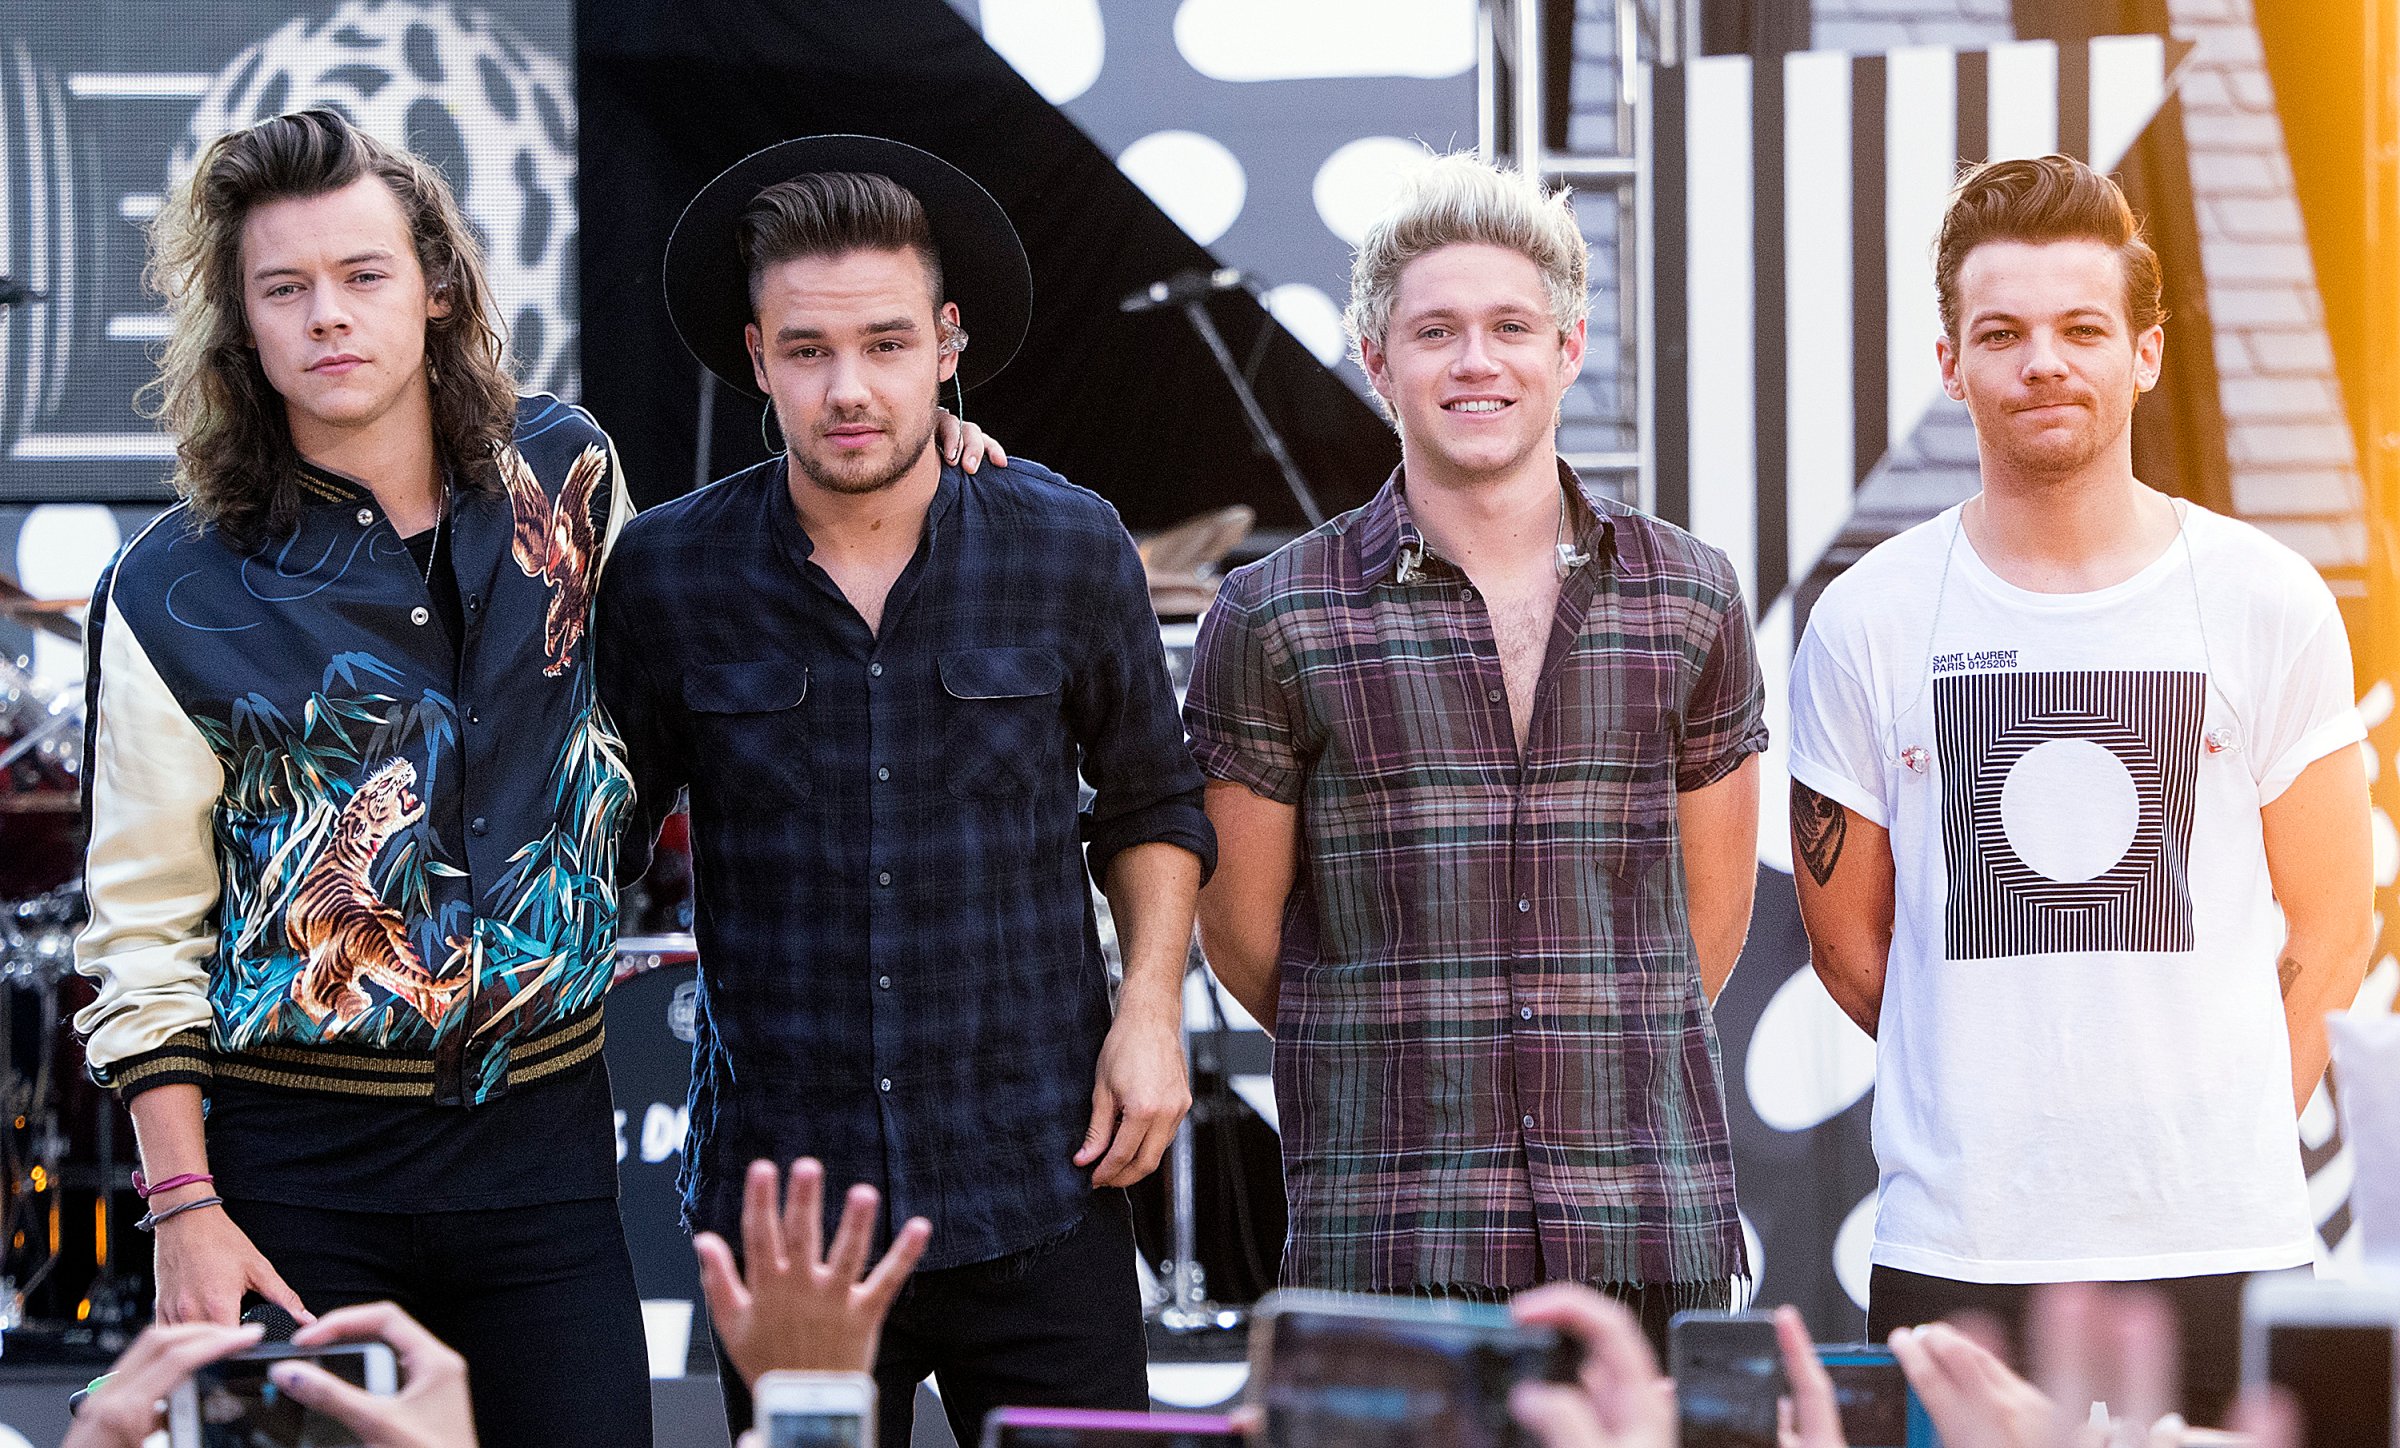 (L-R) Harry Styles, Liam Payne, Niall Horan and Louis Tomlinson of One Direction perform on "Good Morning America's Summer Concert Series" in New York City on Aug. 4, 2015.